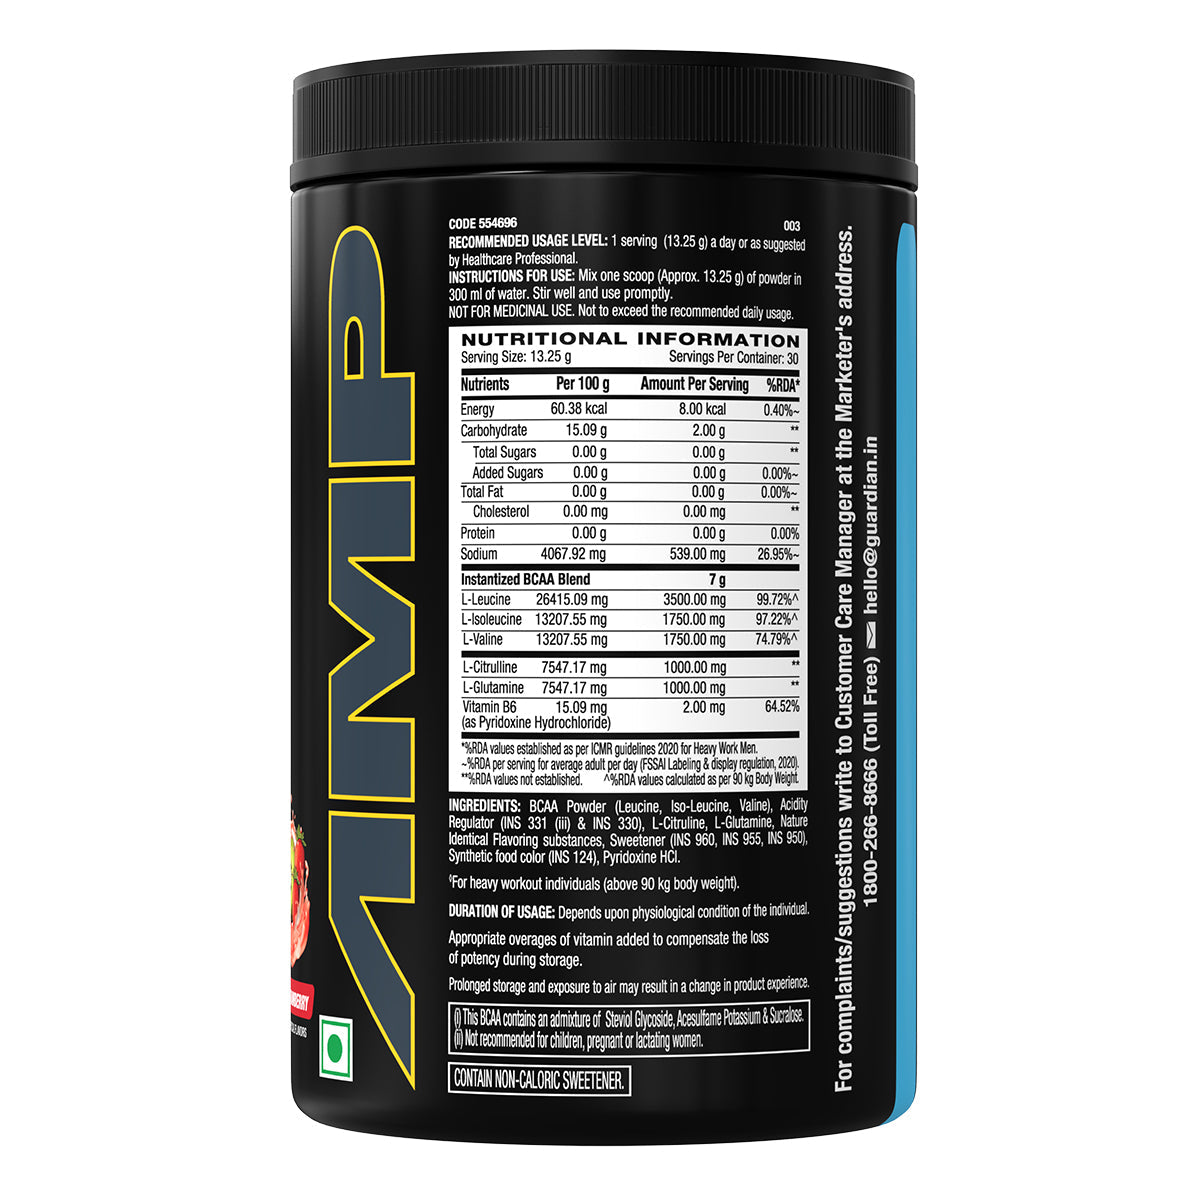 GNC AMP Gold Series BCAA Advanced - Fuels Lean Muscle Strength & Recovery | Informed Choice Certified | 400g | 30 Servings